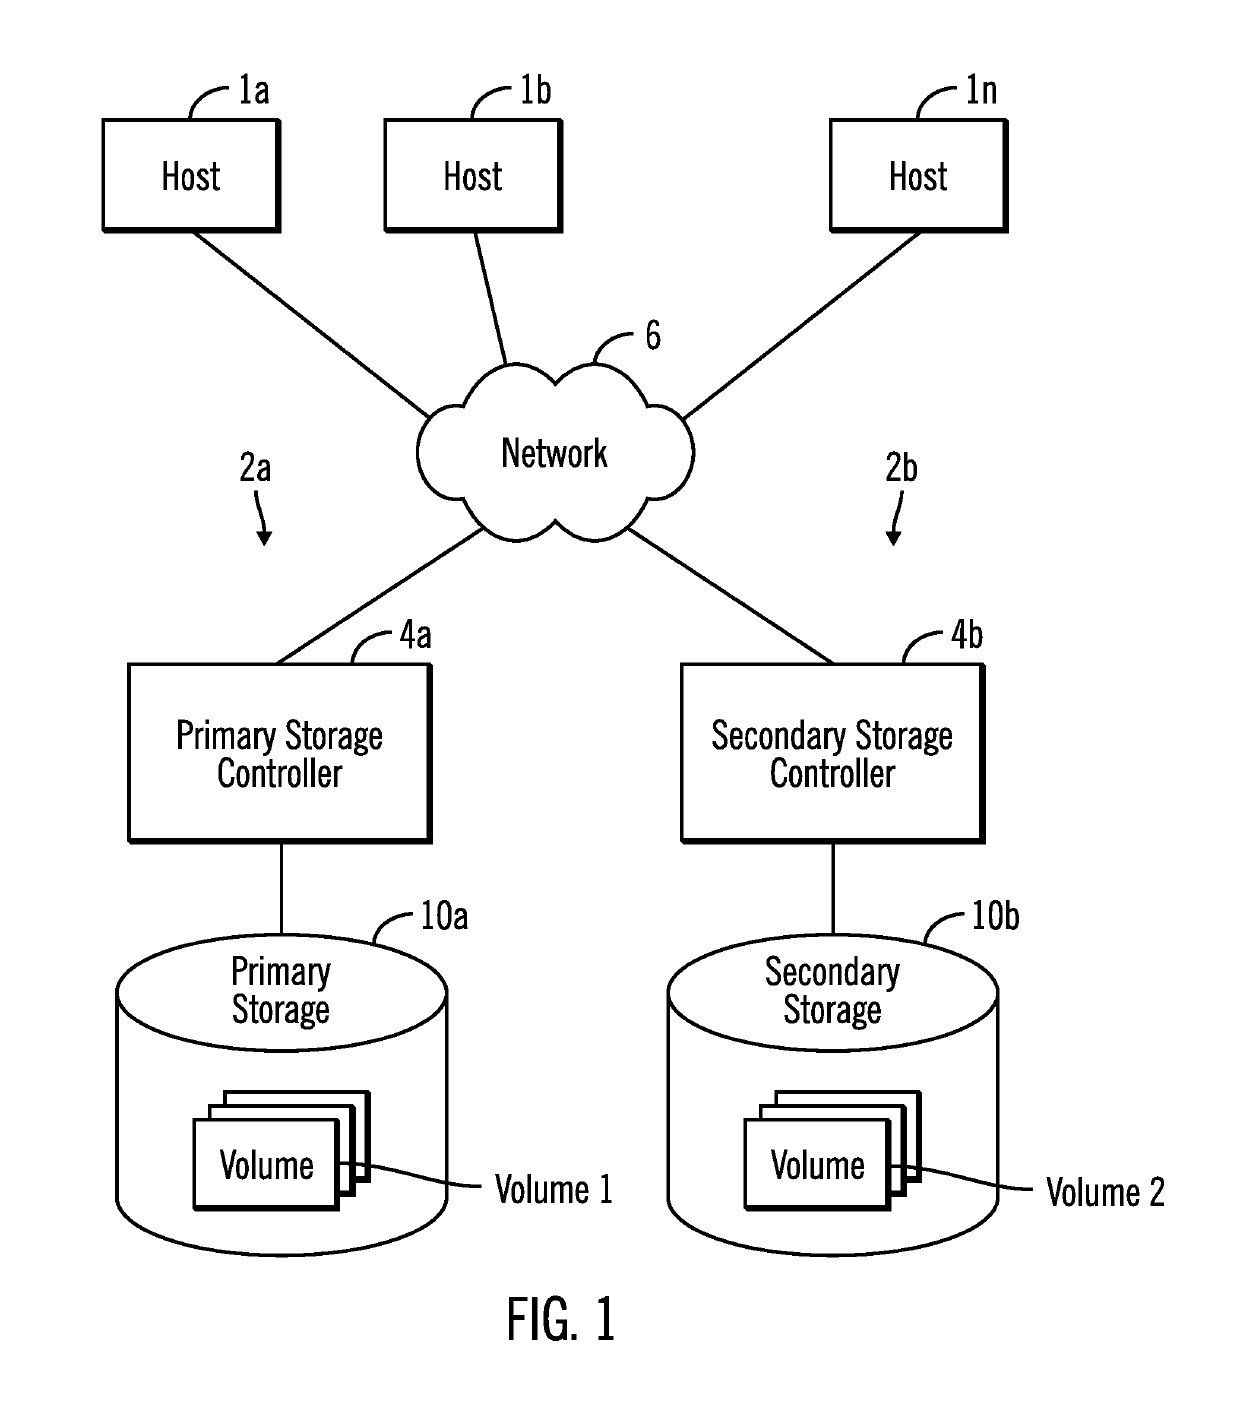 Virtual storage drive management in a data storage system